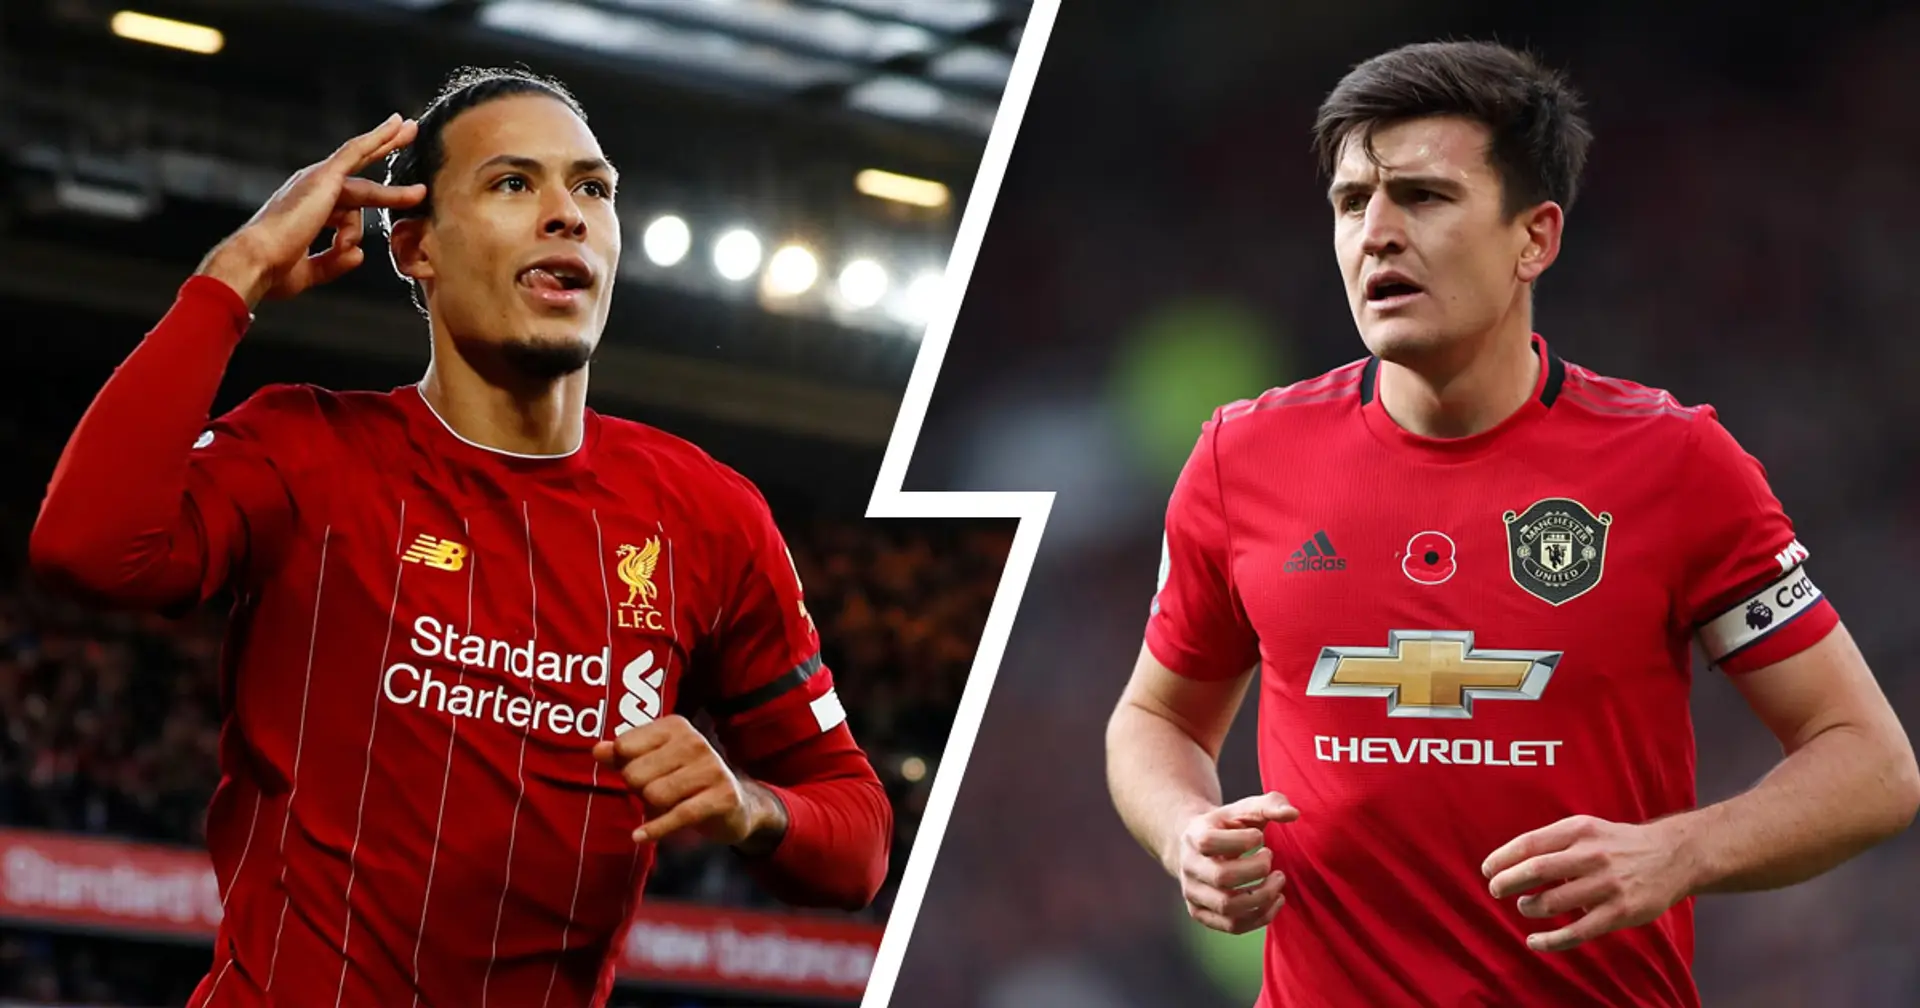 Revealed: Where Harry Maguire stands among world's most valuable centre-backs 10 months after record-breaking United move